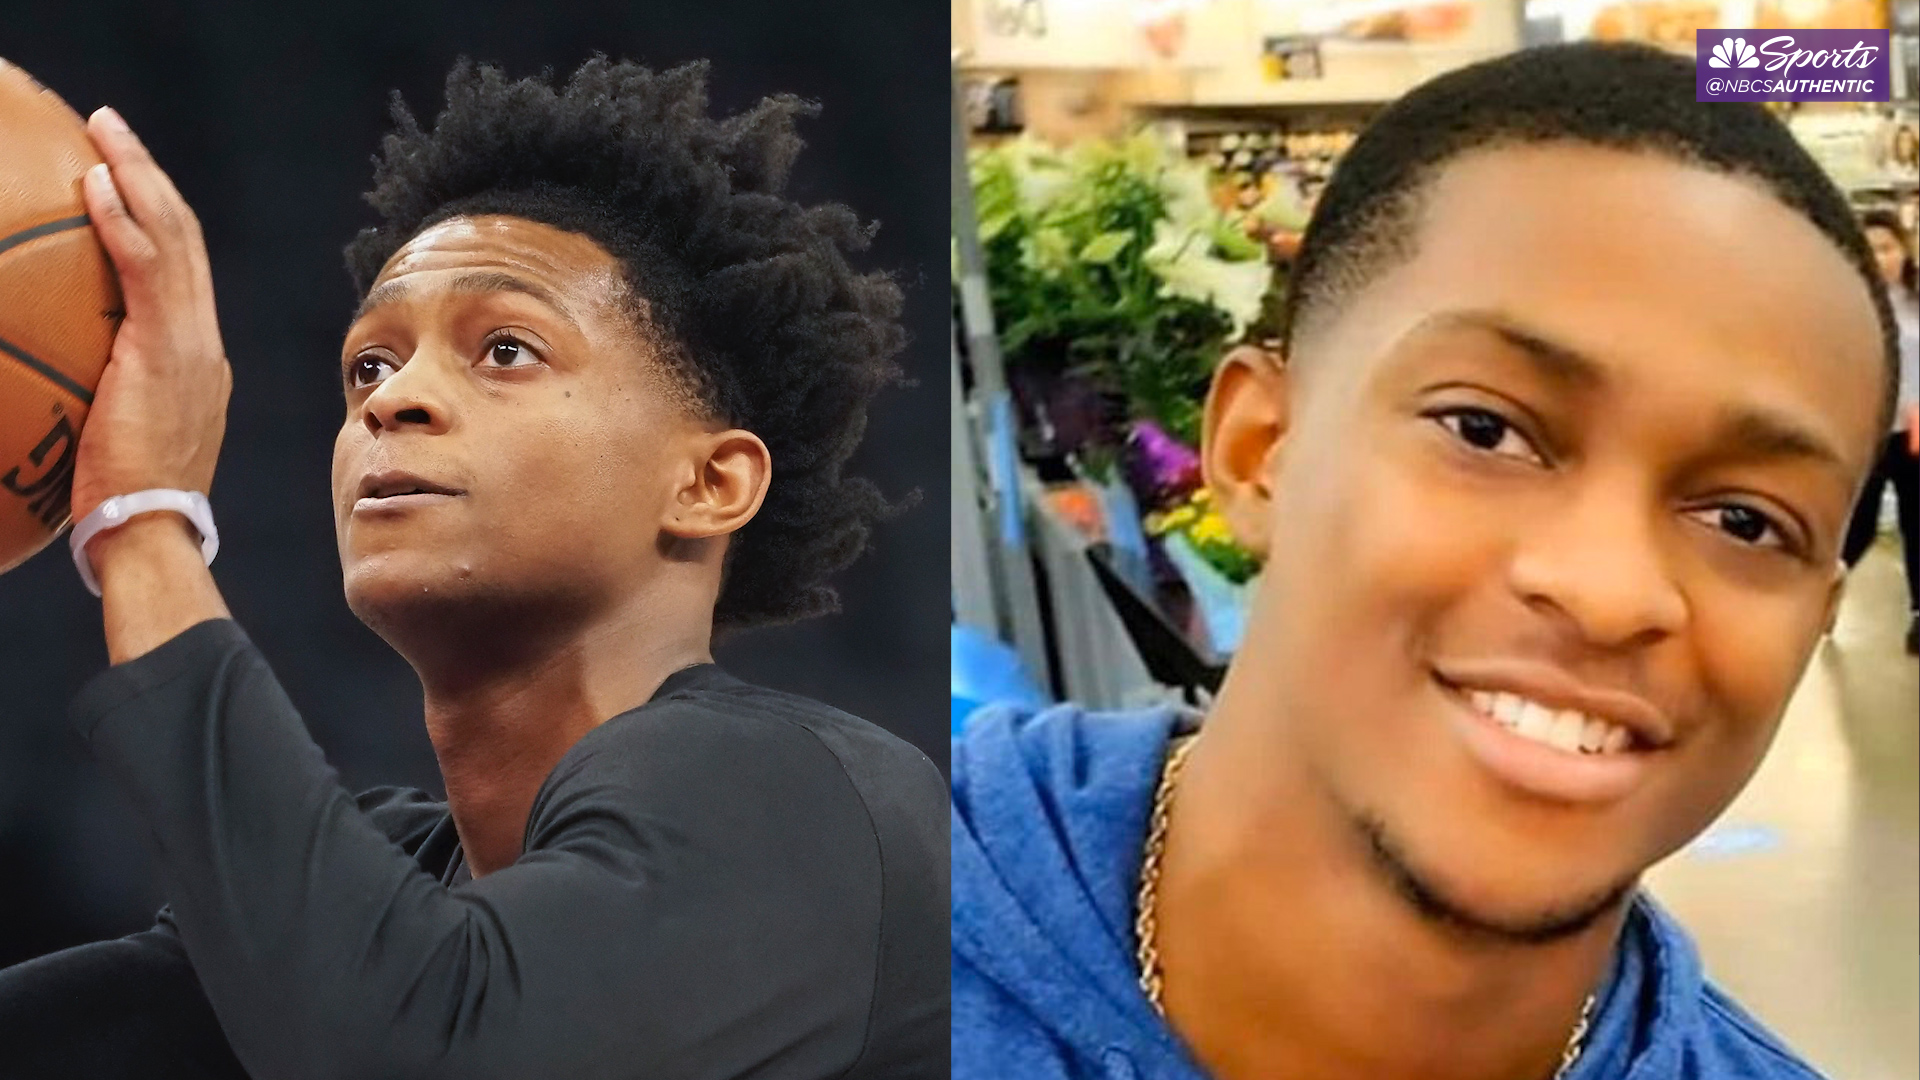 De'Aaron Fox Is the Face of Change, for Better or Worse - The Ringer